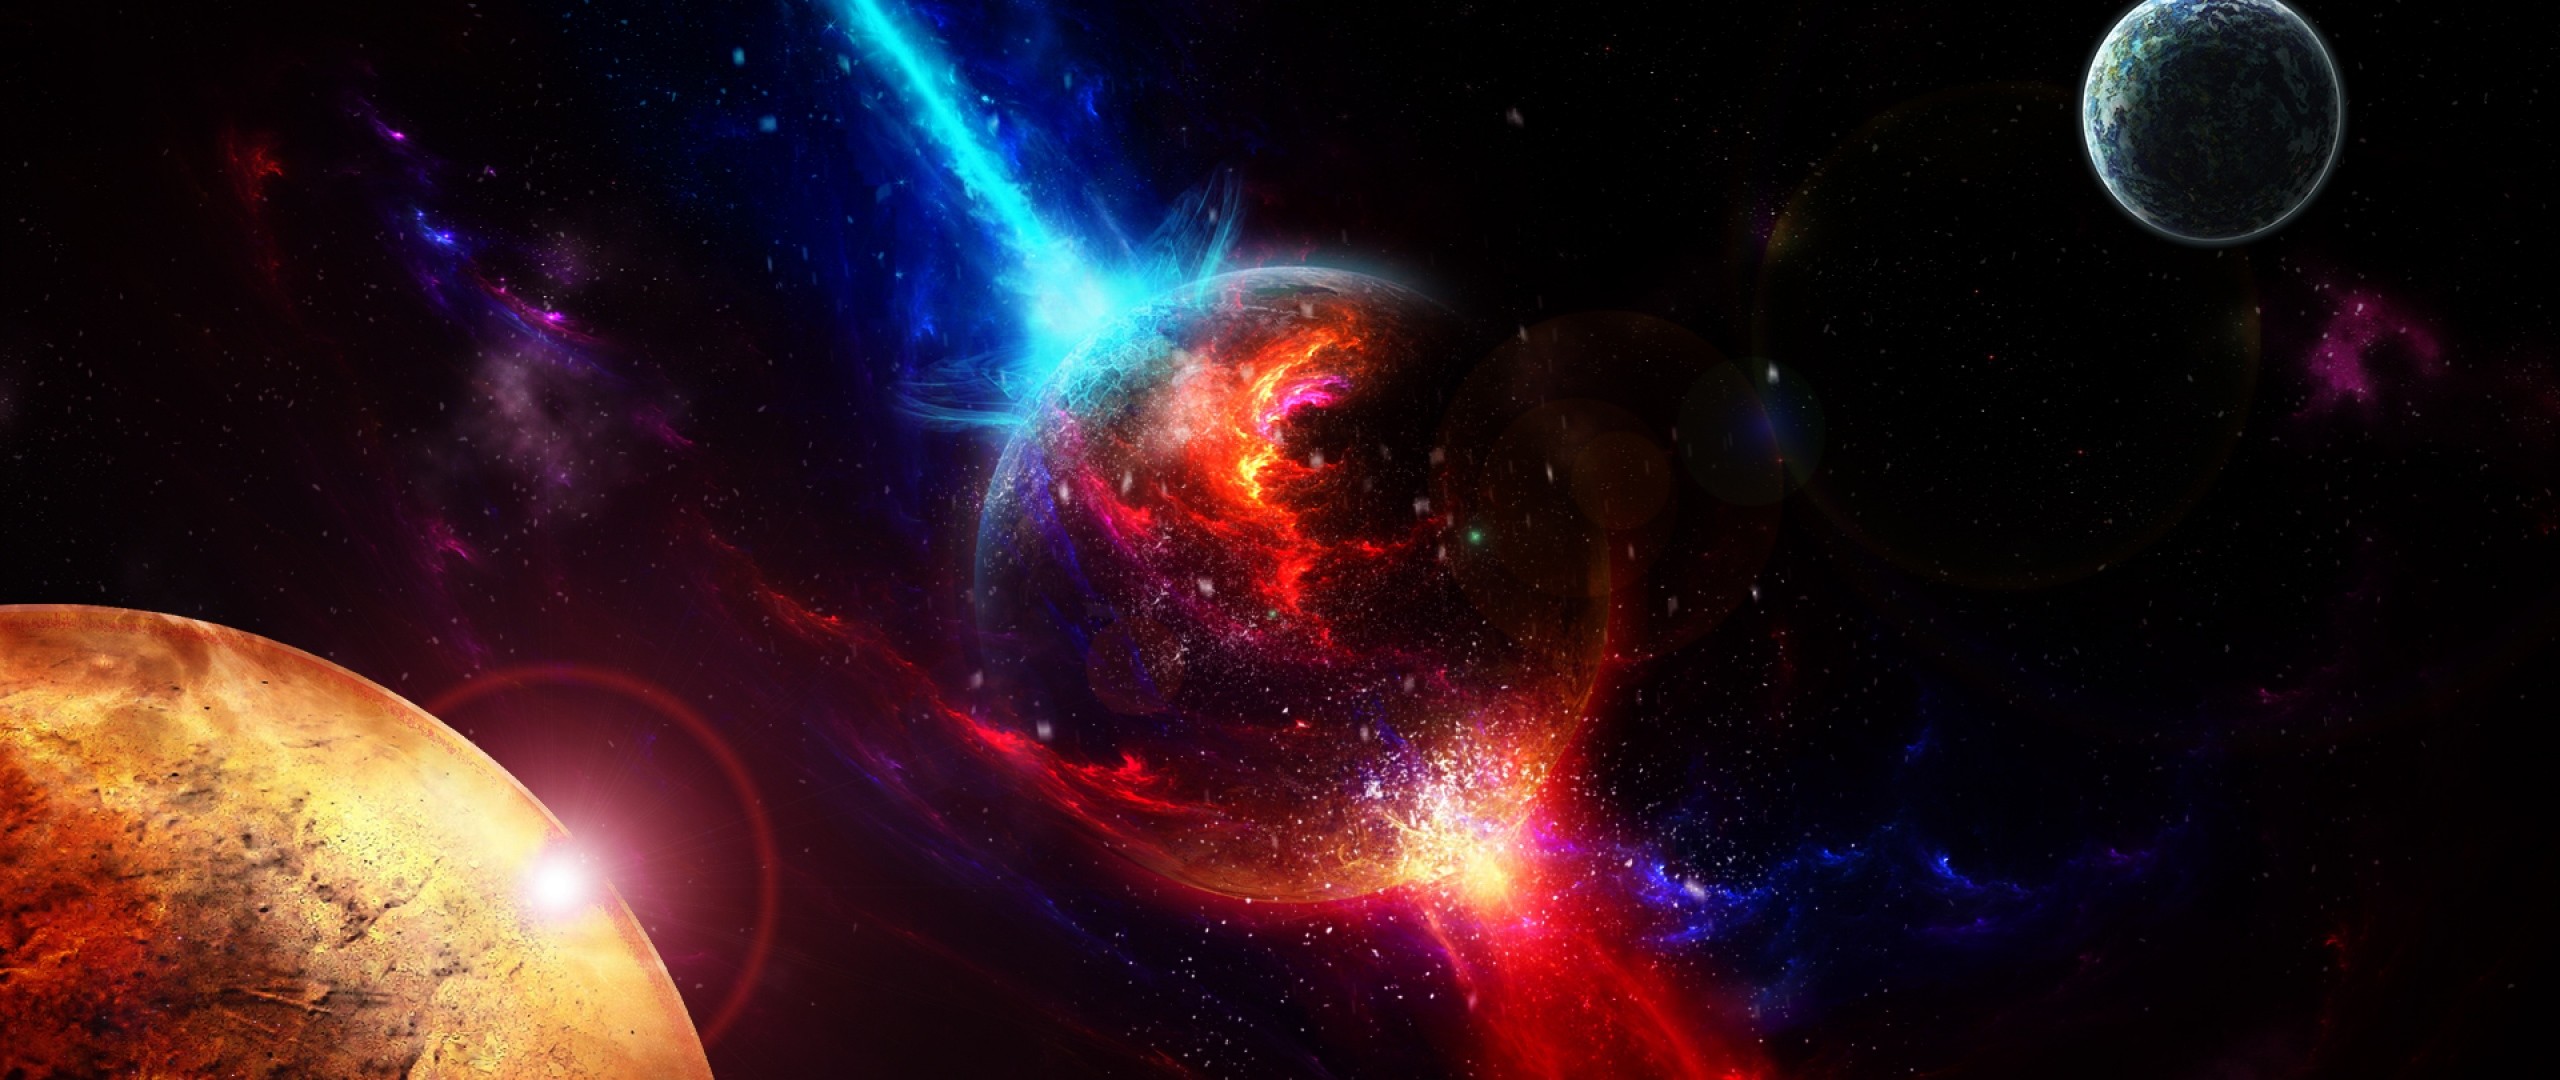 Wallpaper space, planets, takeoff, explosion